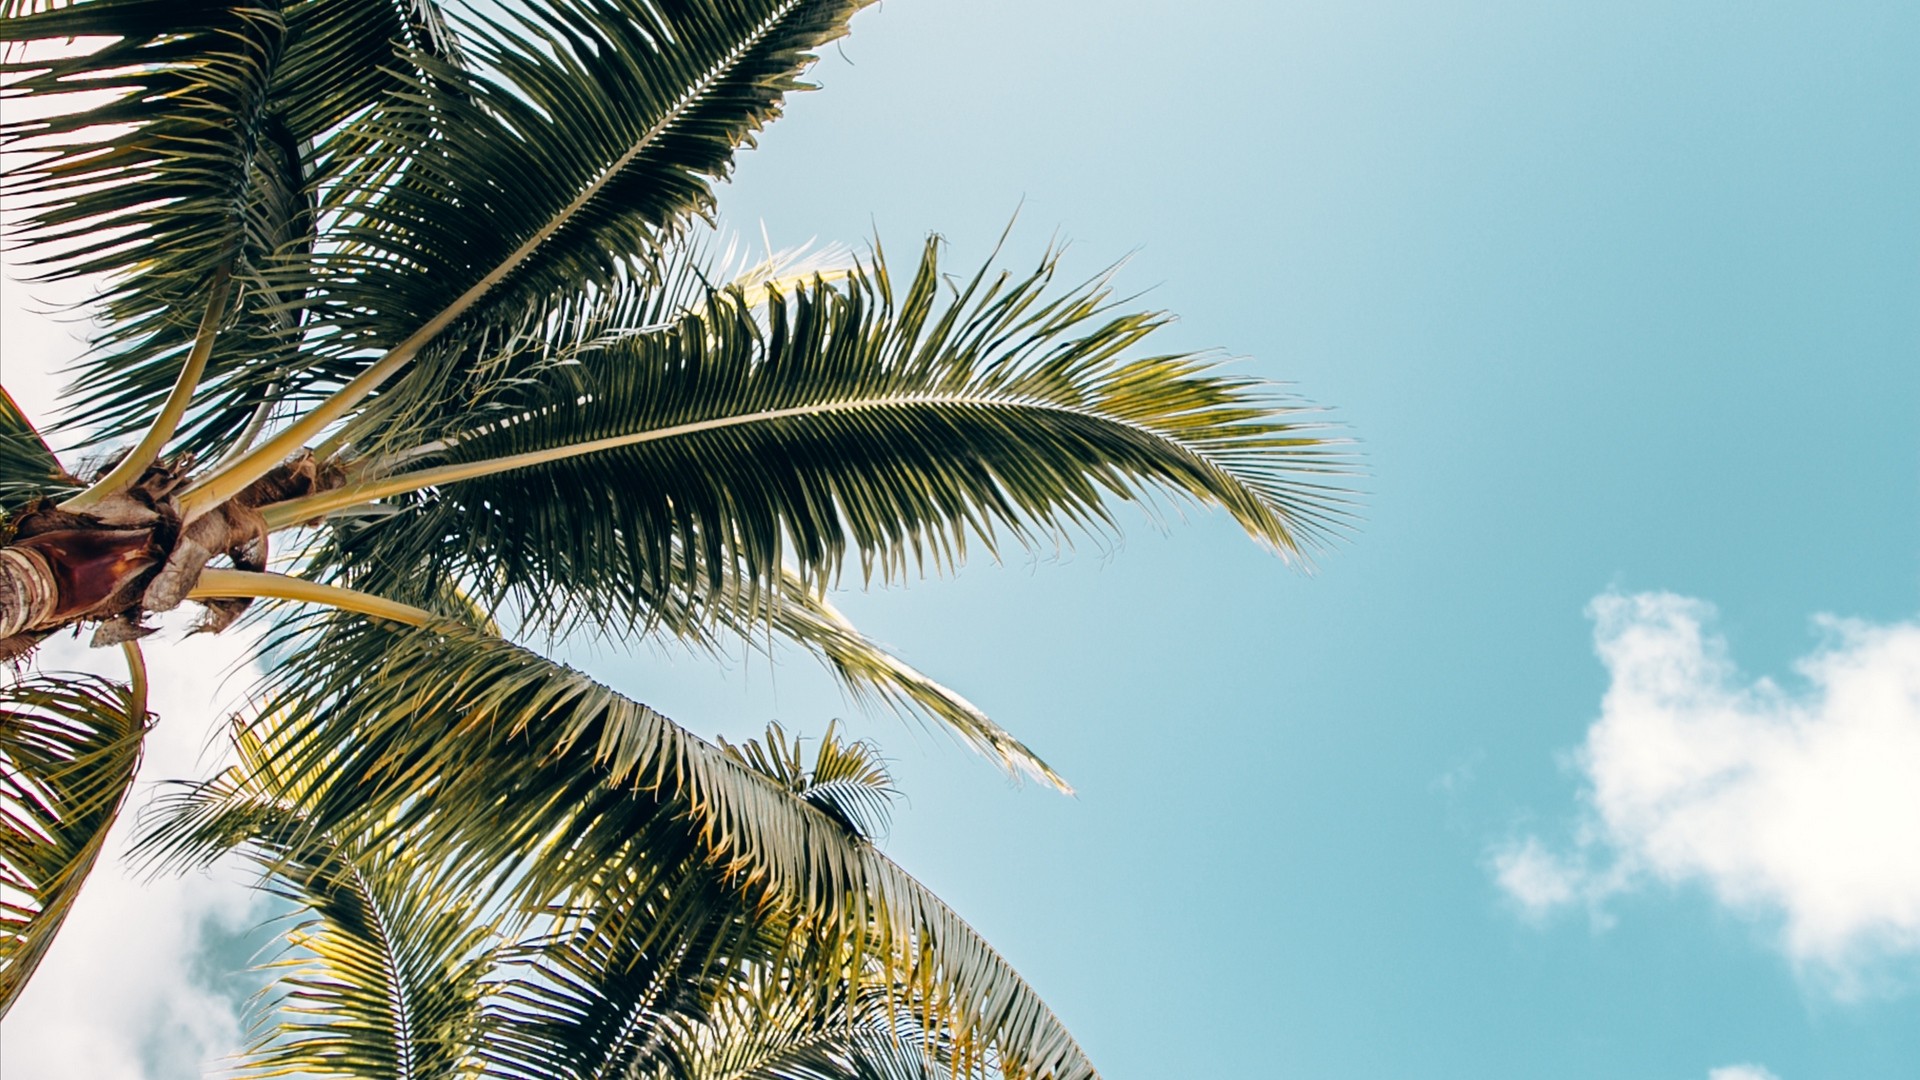 1920x1080 wallpapers: palm trees, crowns, branches, leaves (image)